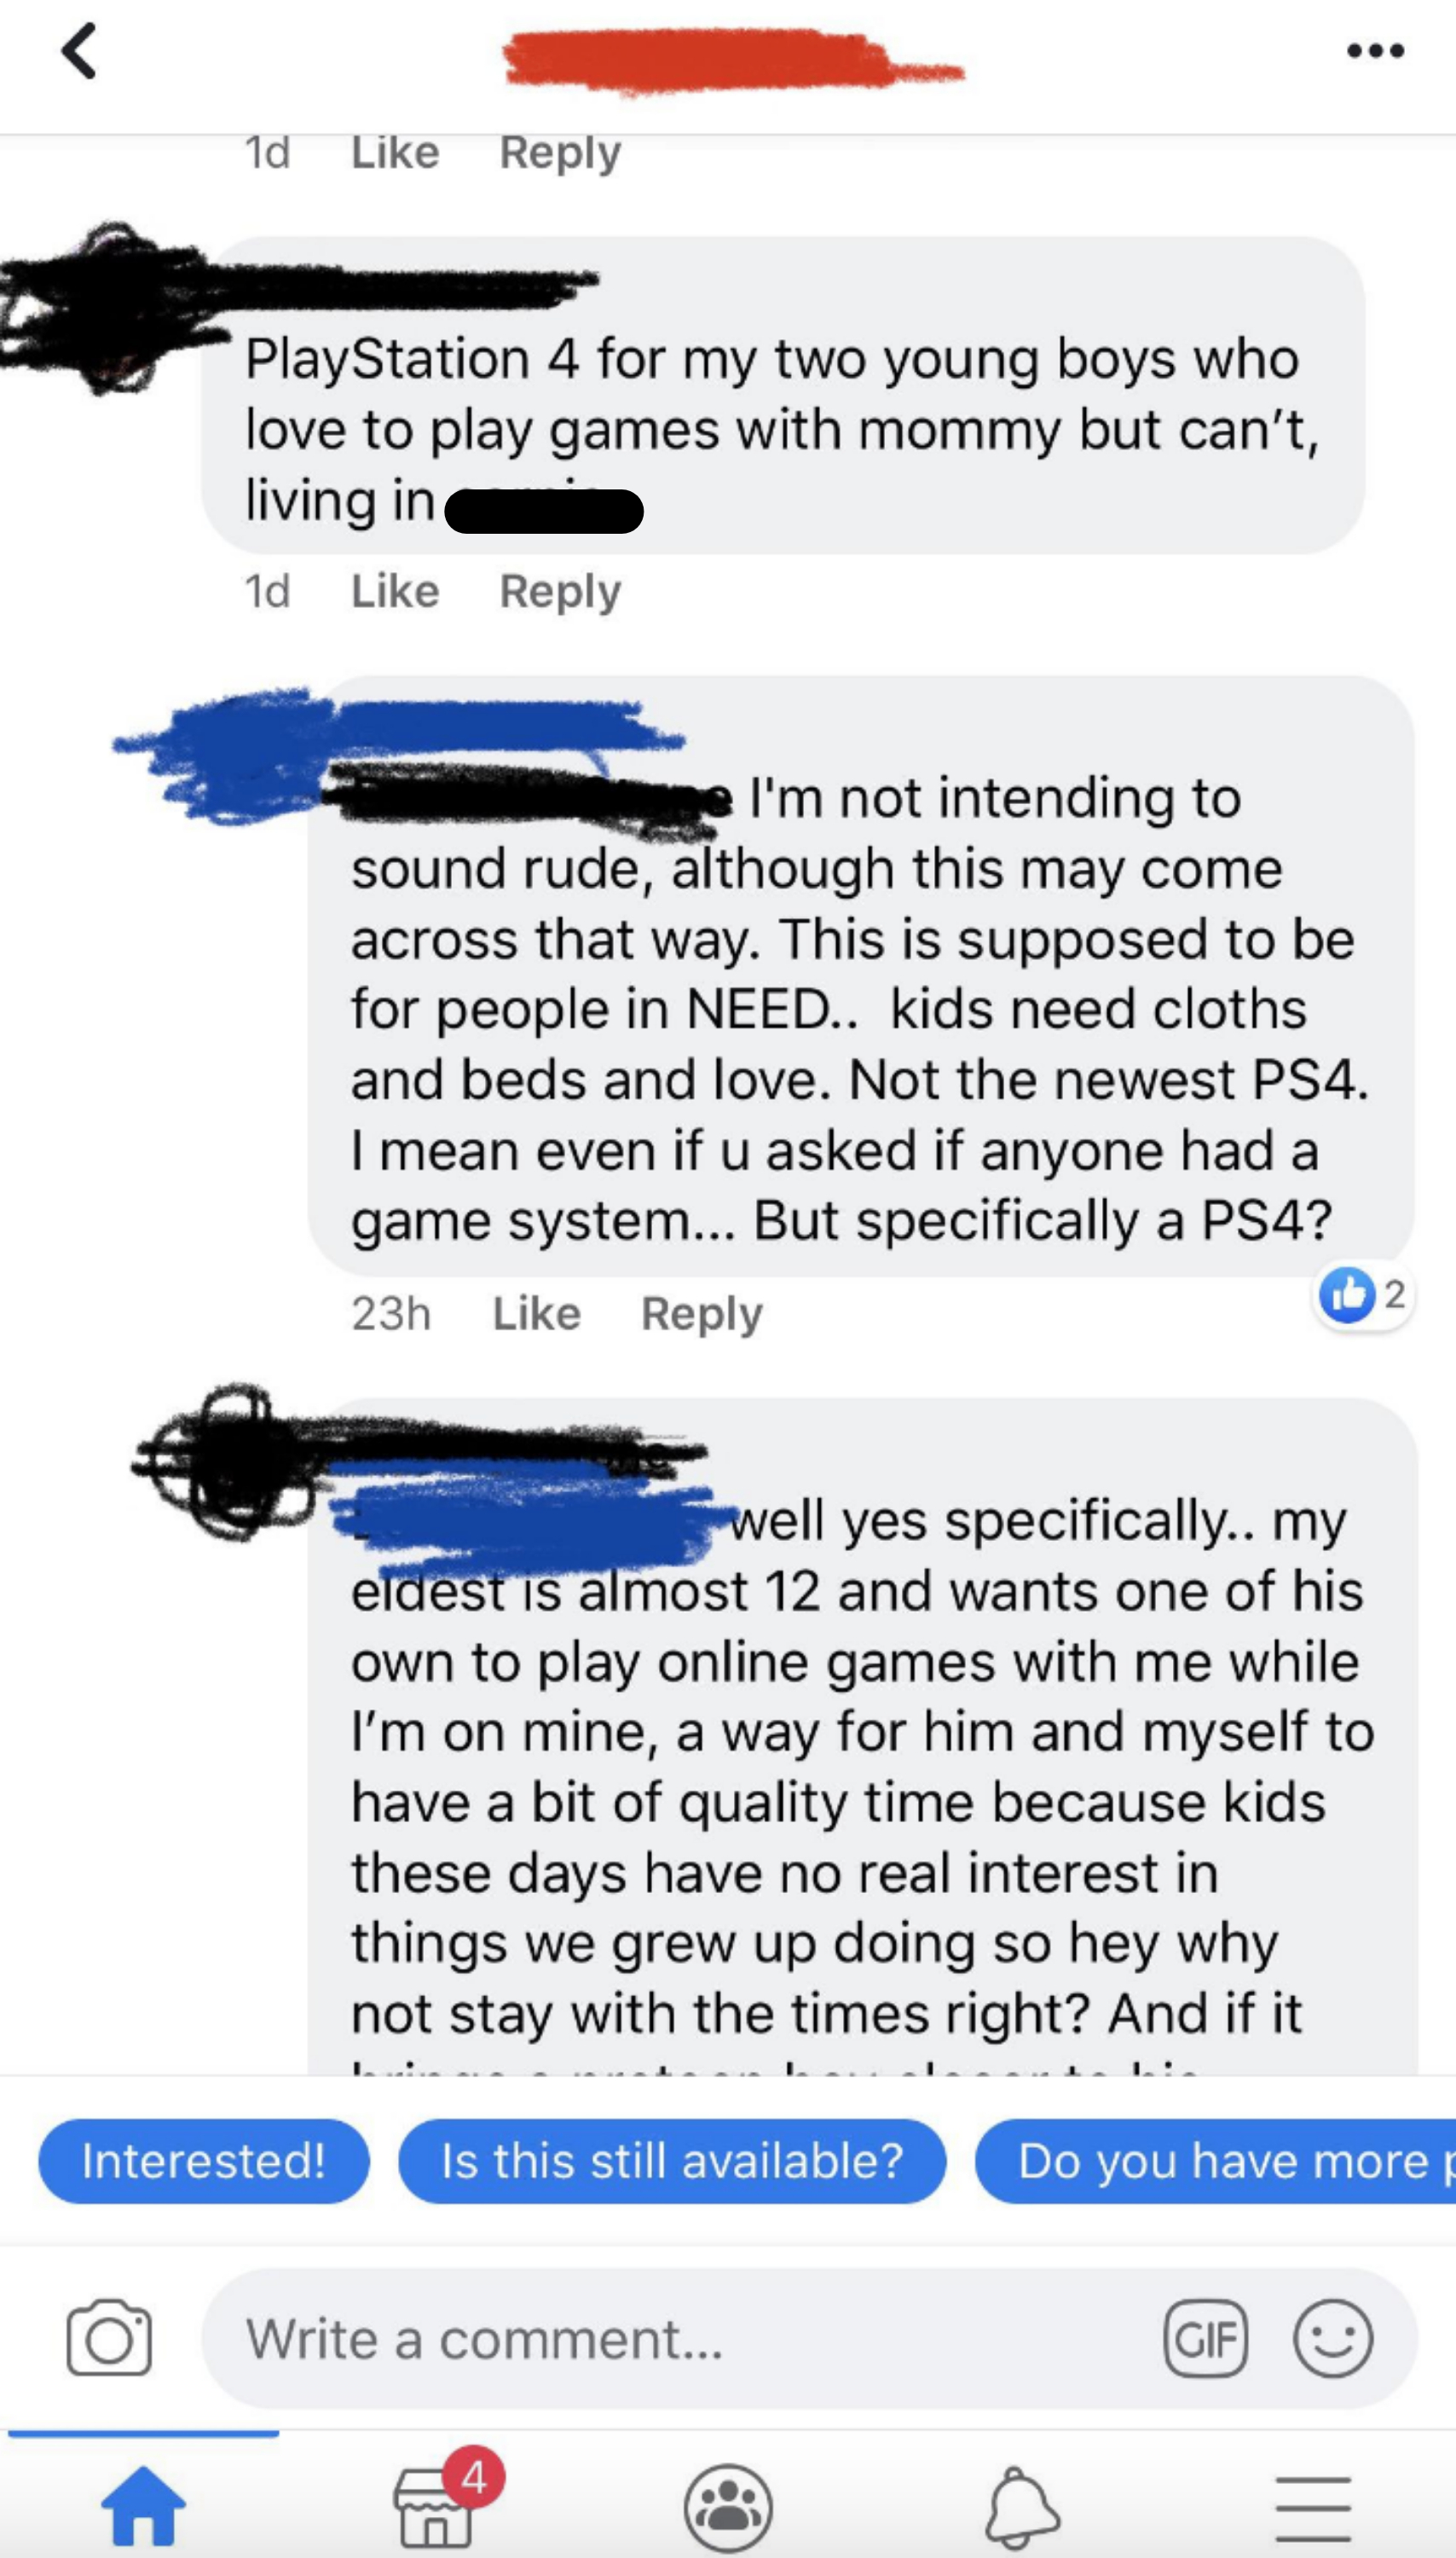 In response to a request for a PS4 so her sons can &quot;play with mommy,&quot; person says the forum is supposed to be for people in need of &quot;clothes and beds and love,&quot; not a specific game system; woman says her oldest wants his own to play online with her